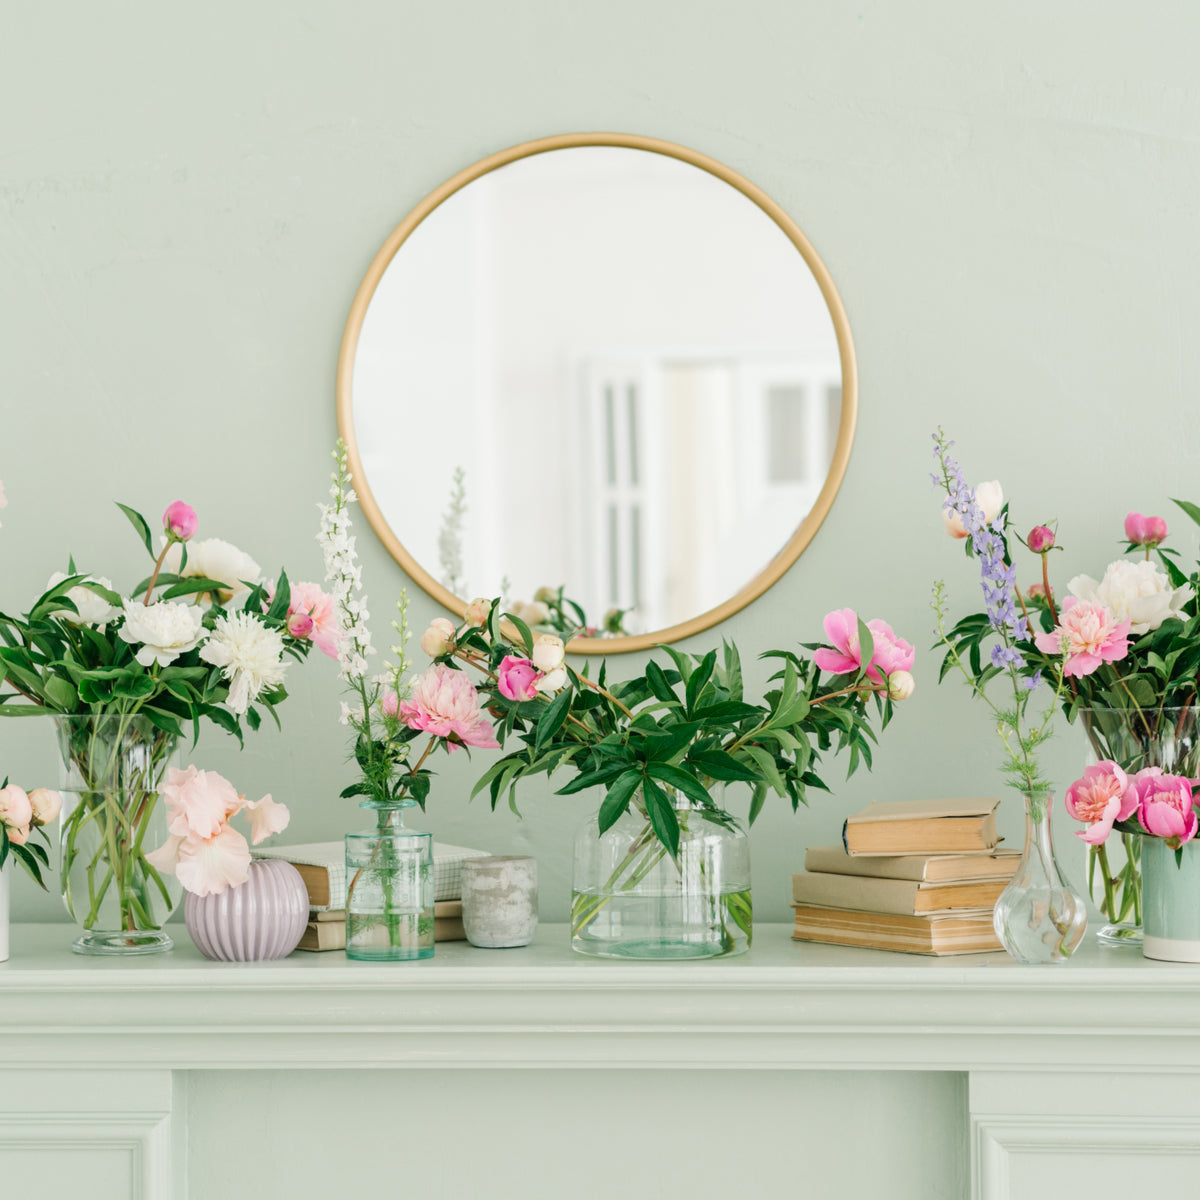 Styling Your Mantel and Fireplace for Warmer Months